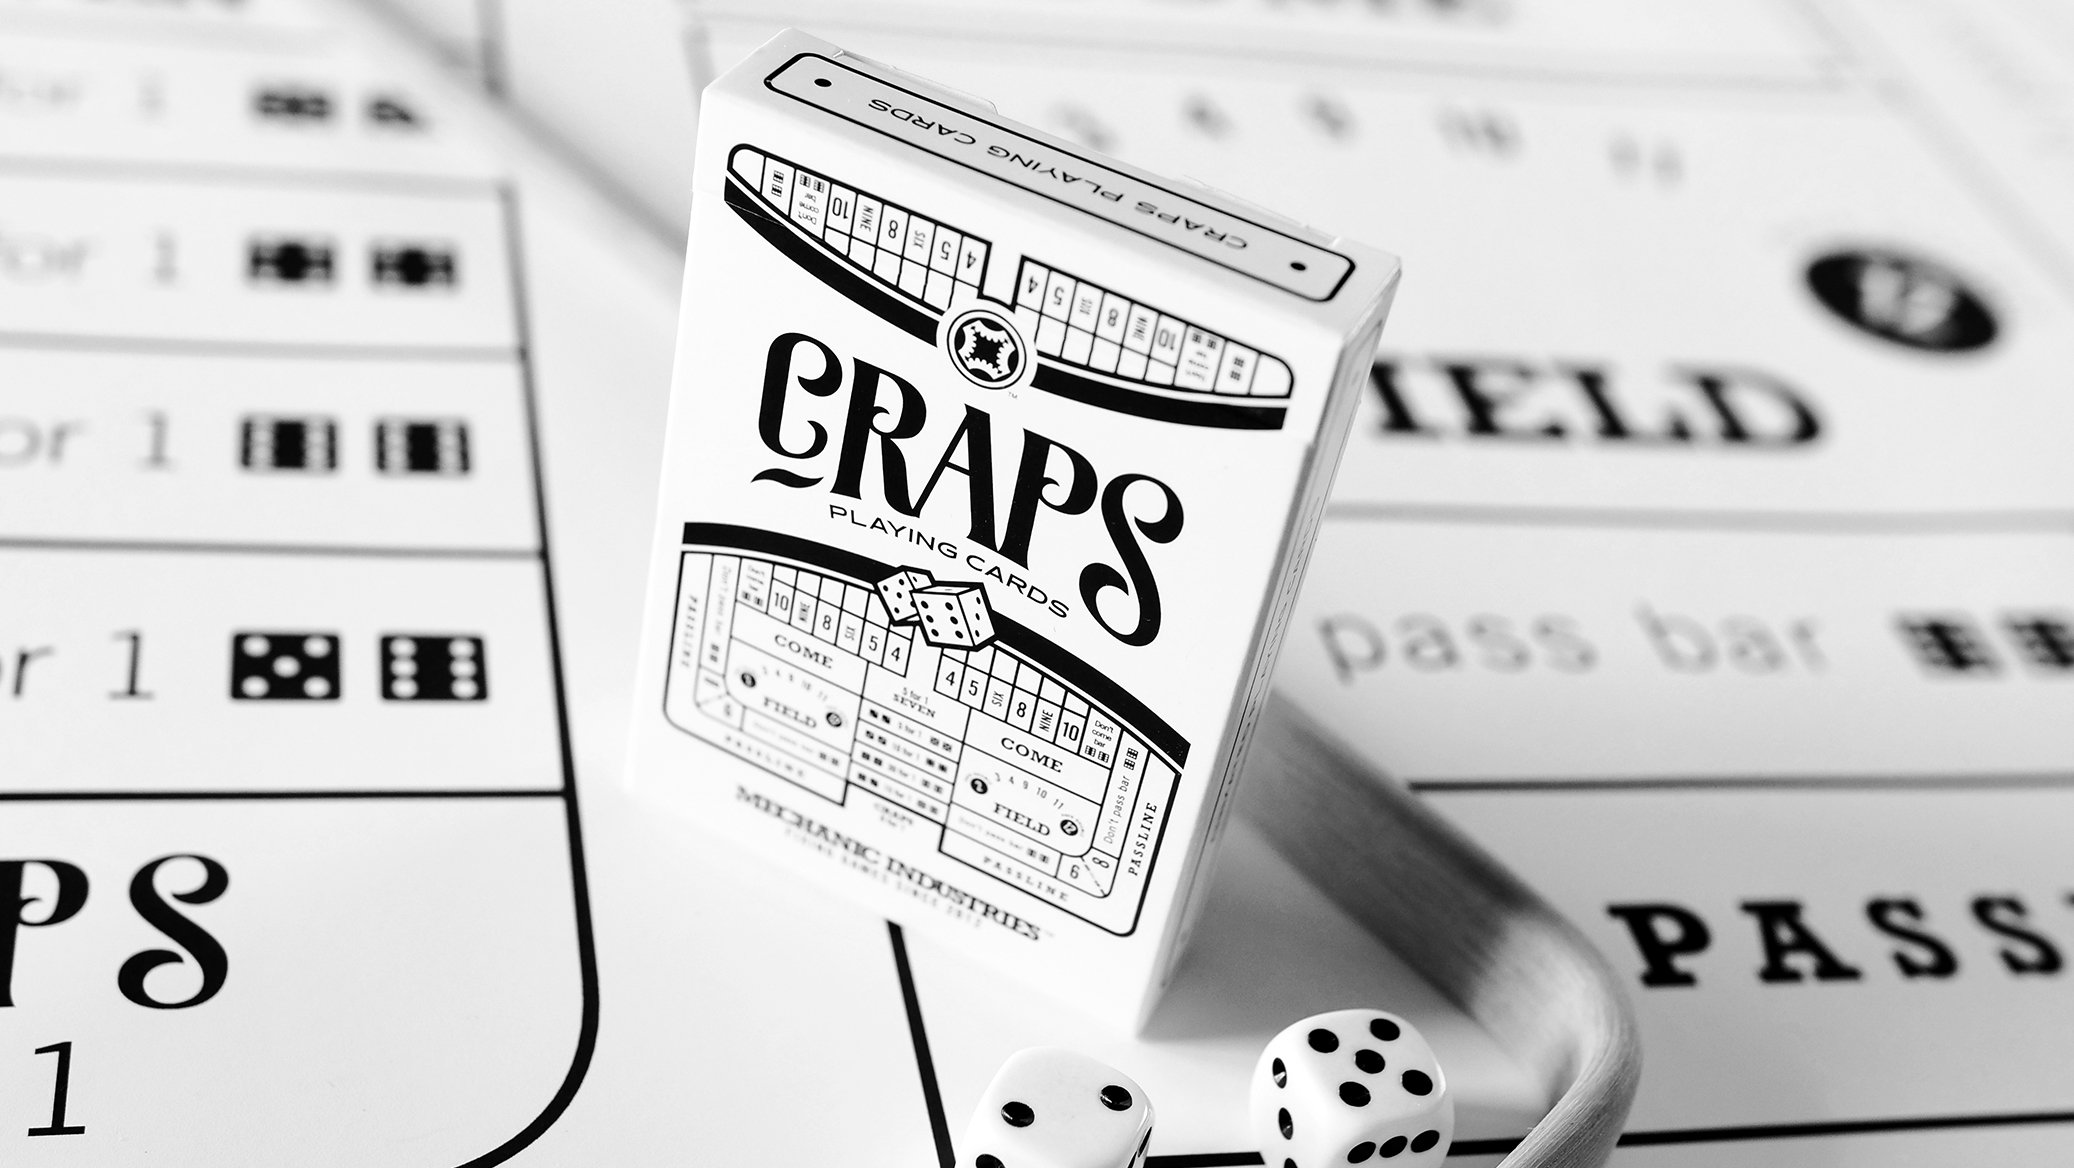 craps-playing-cards-tuck-case.jpg